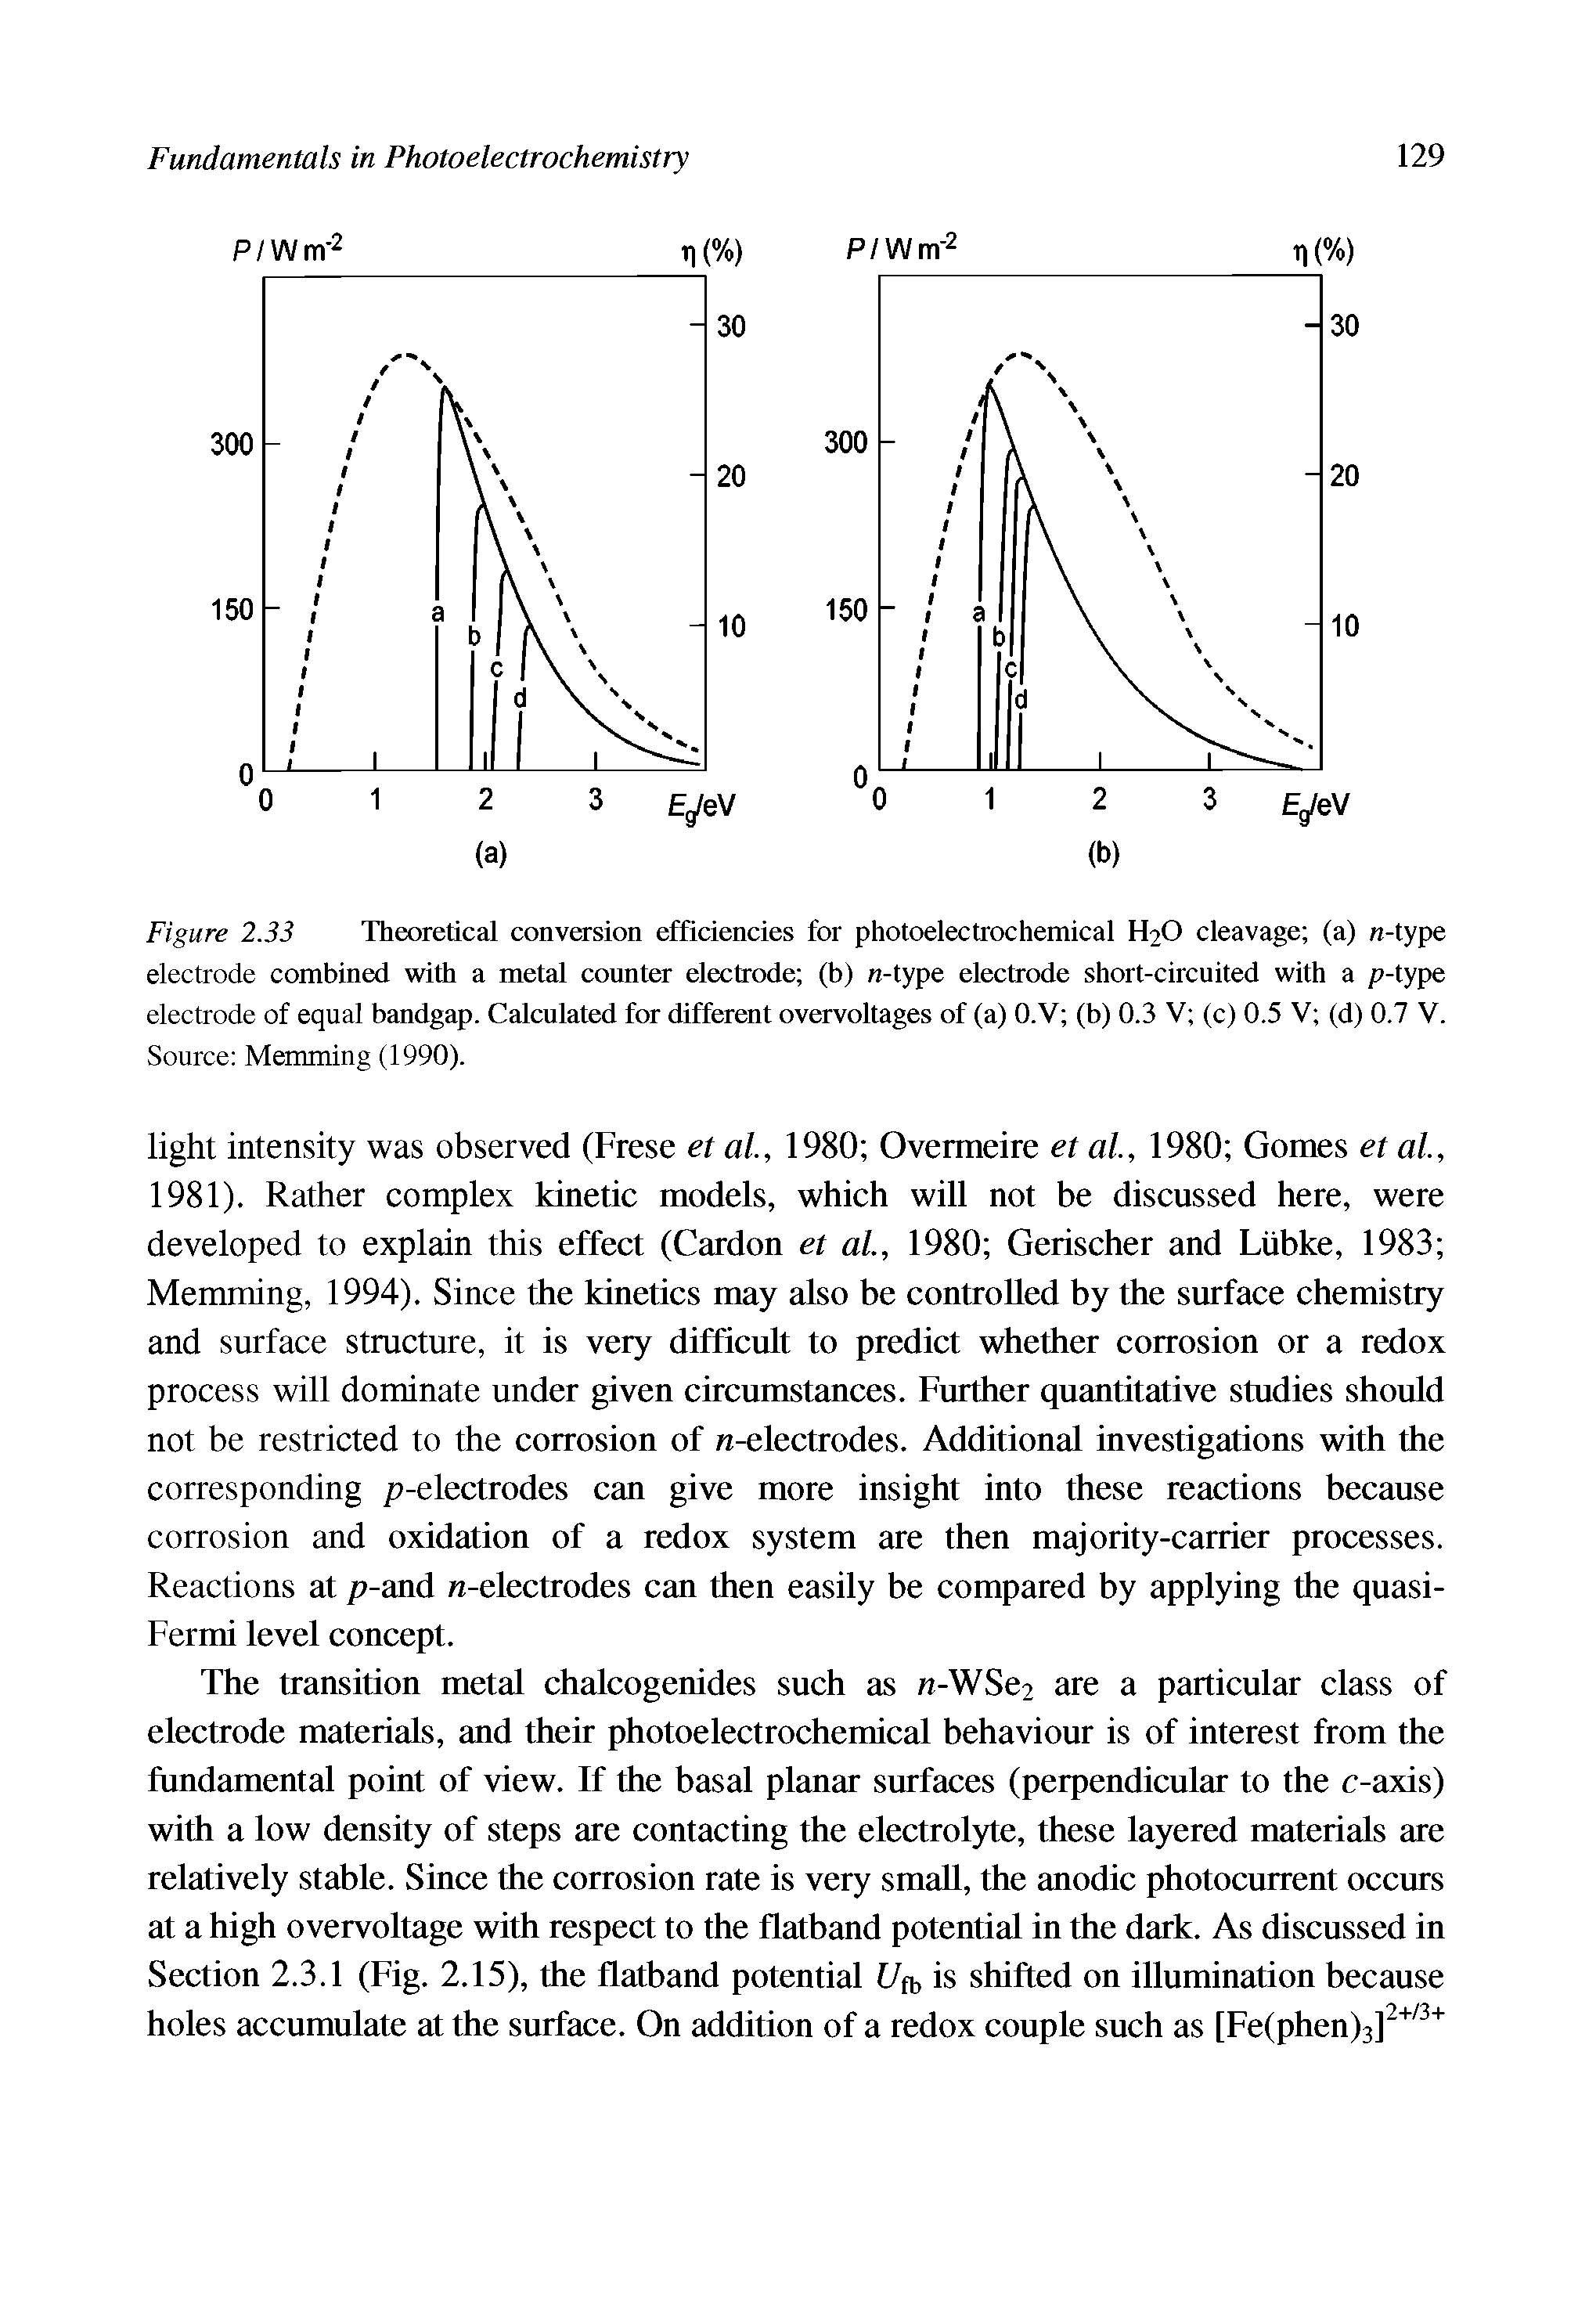 Figure 2.33 Theoretical conversion efficiencies for photoelectrochemical H2O cleavage (a) -type electrode combined with a metal connter electrode (b) -type electrode short-circuited with a p-type electrode of equal bandgap. Calculated for different overvoltages of (a) O.V (b) 0.3 V (c) 0.5 V (d) 0.7 V. Source Memming (1990).